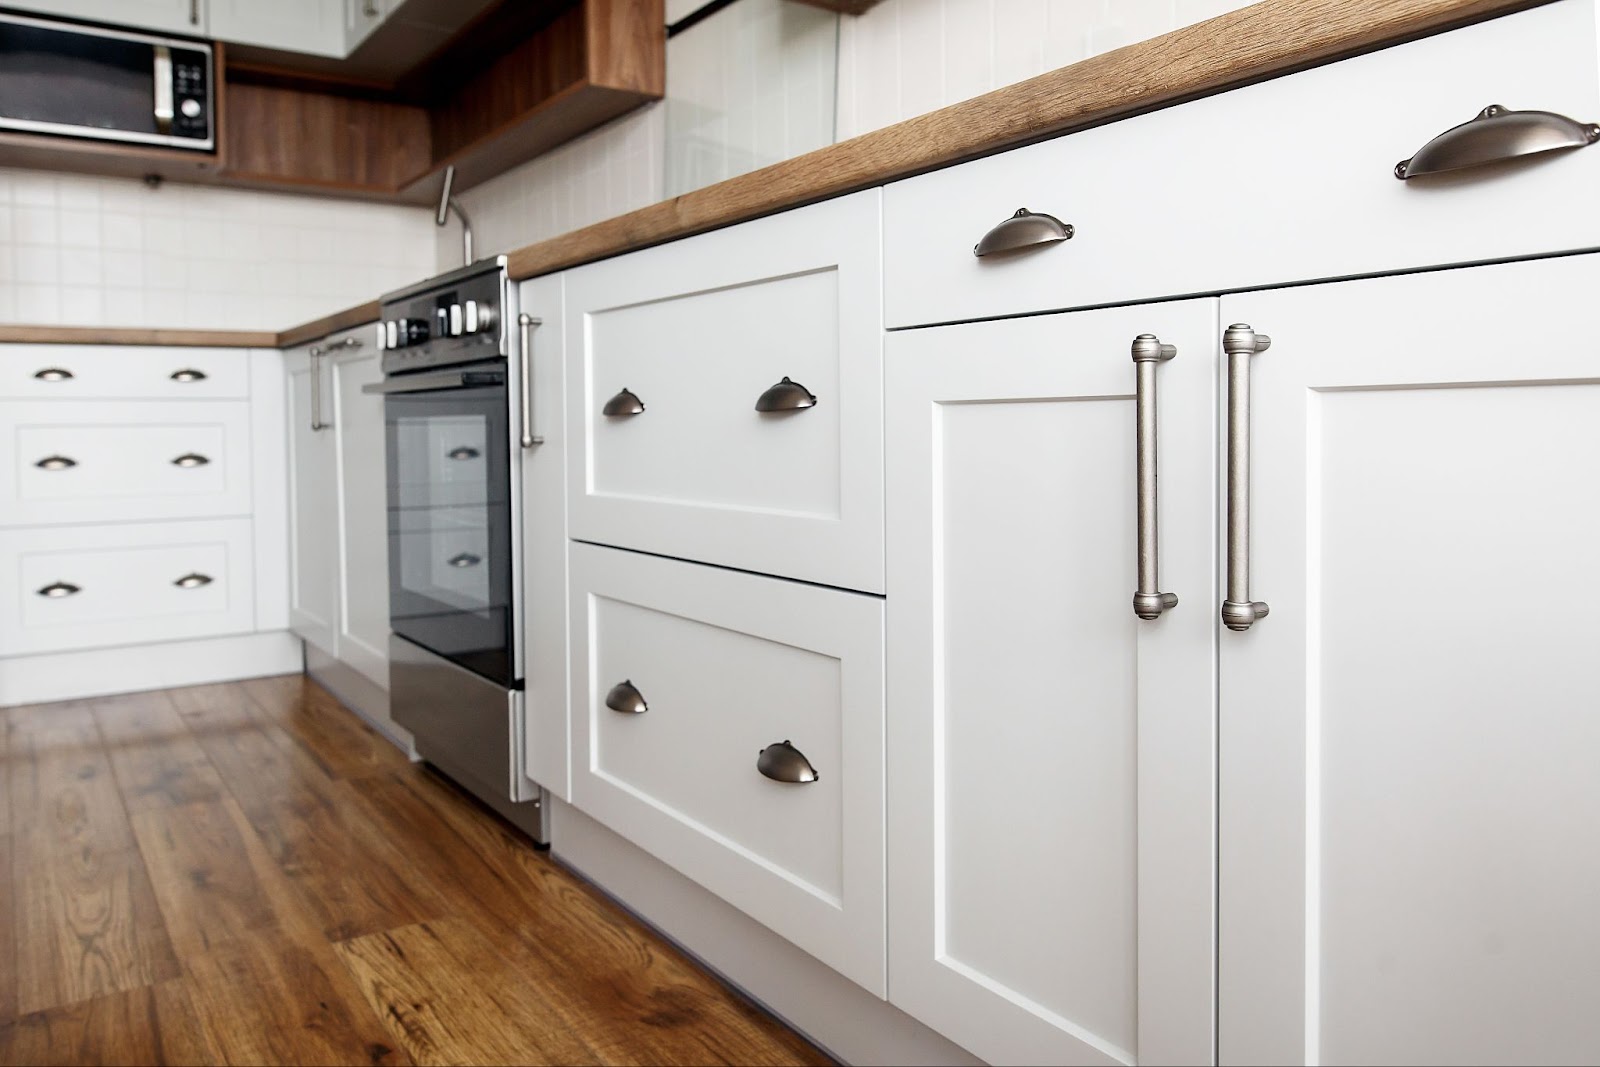 Tips for a Successful Cabinet Refinishing Project